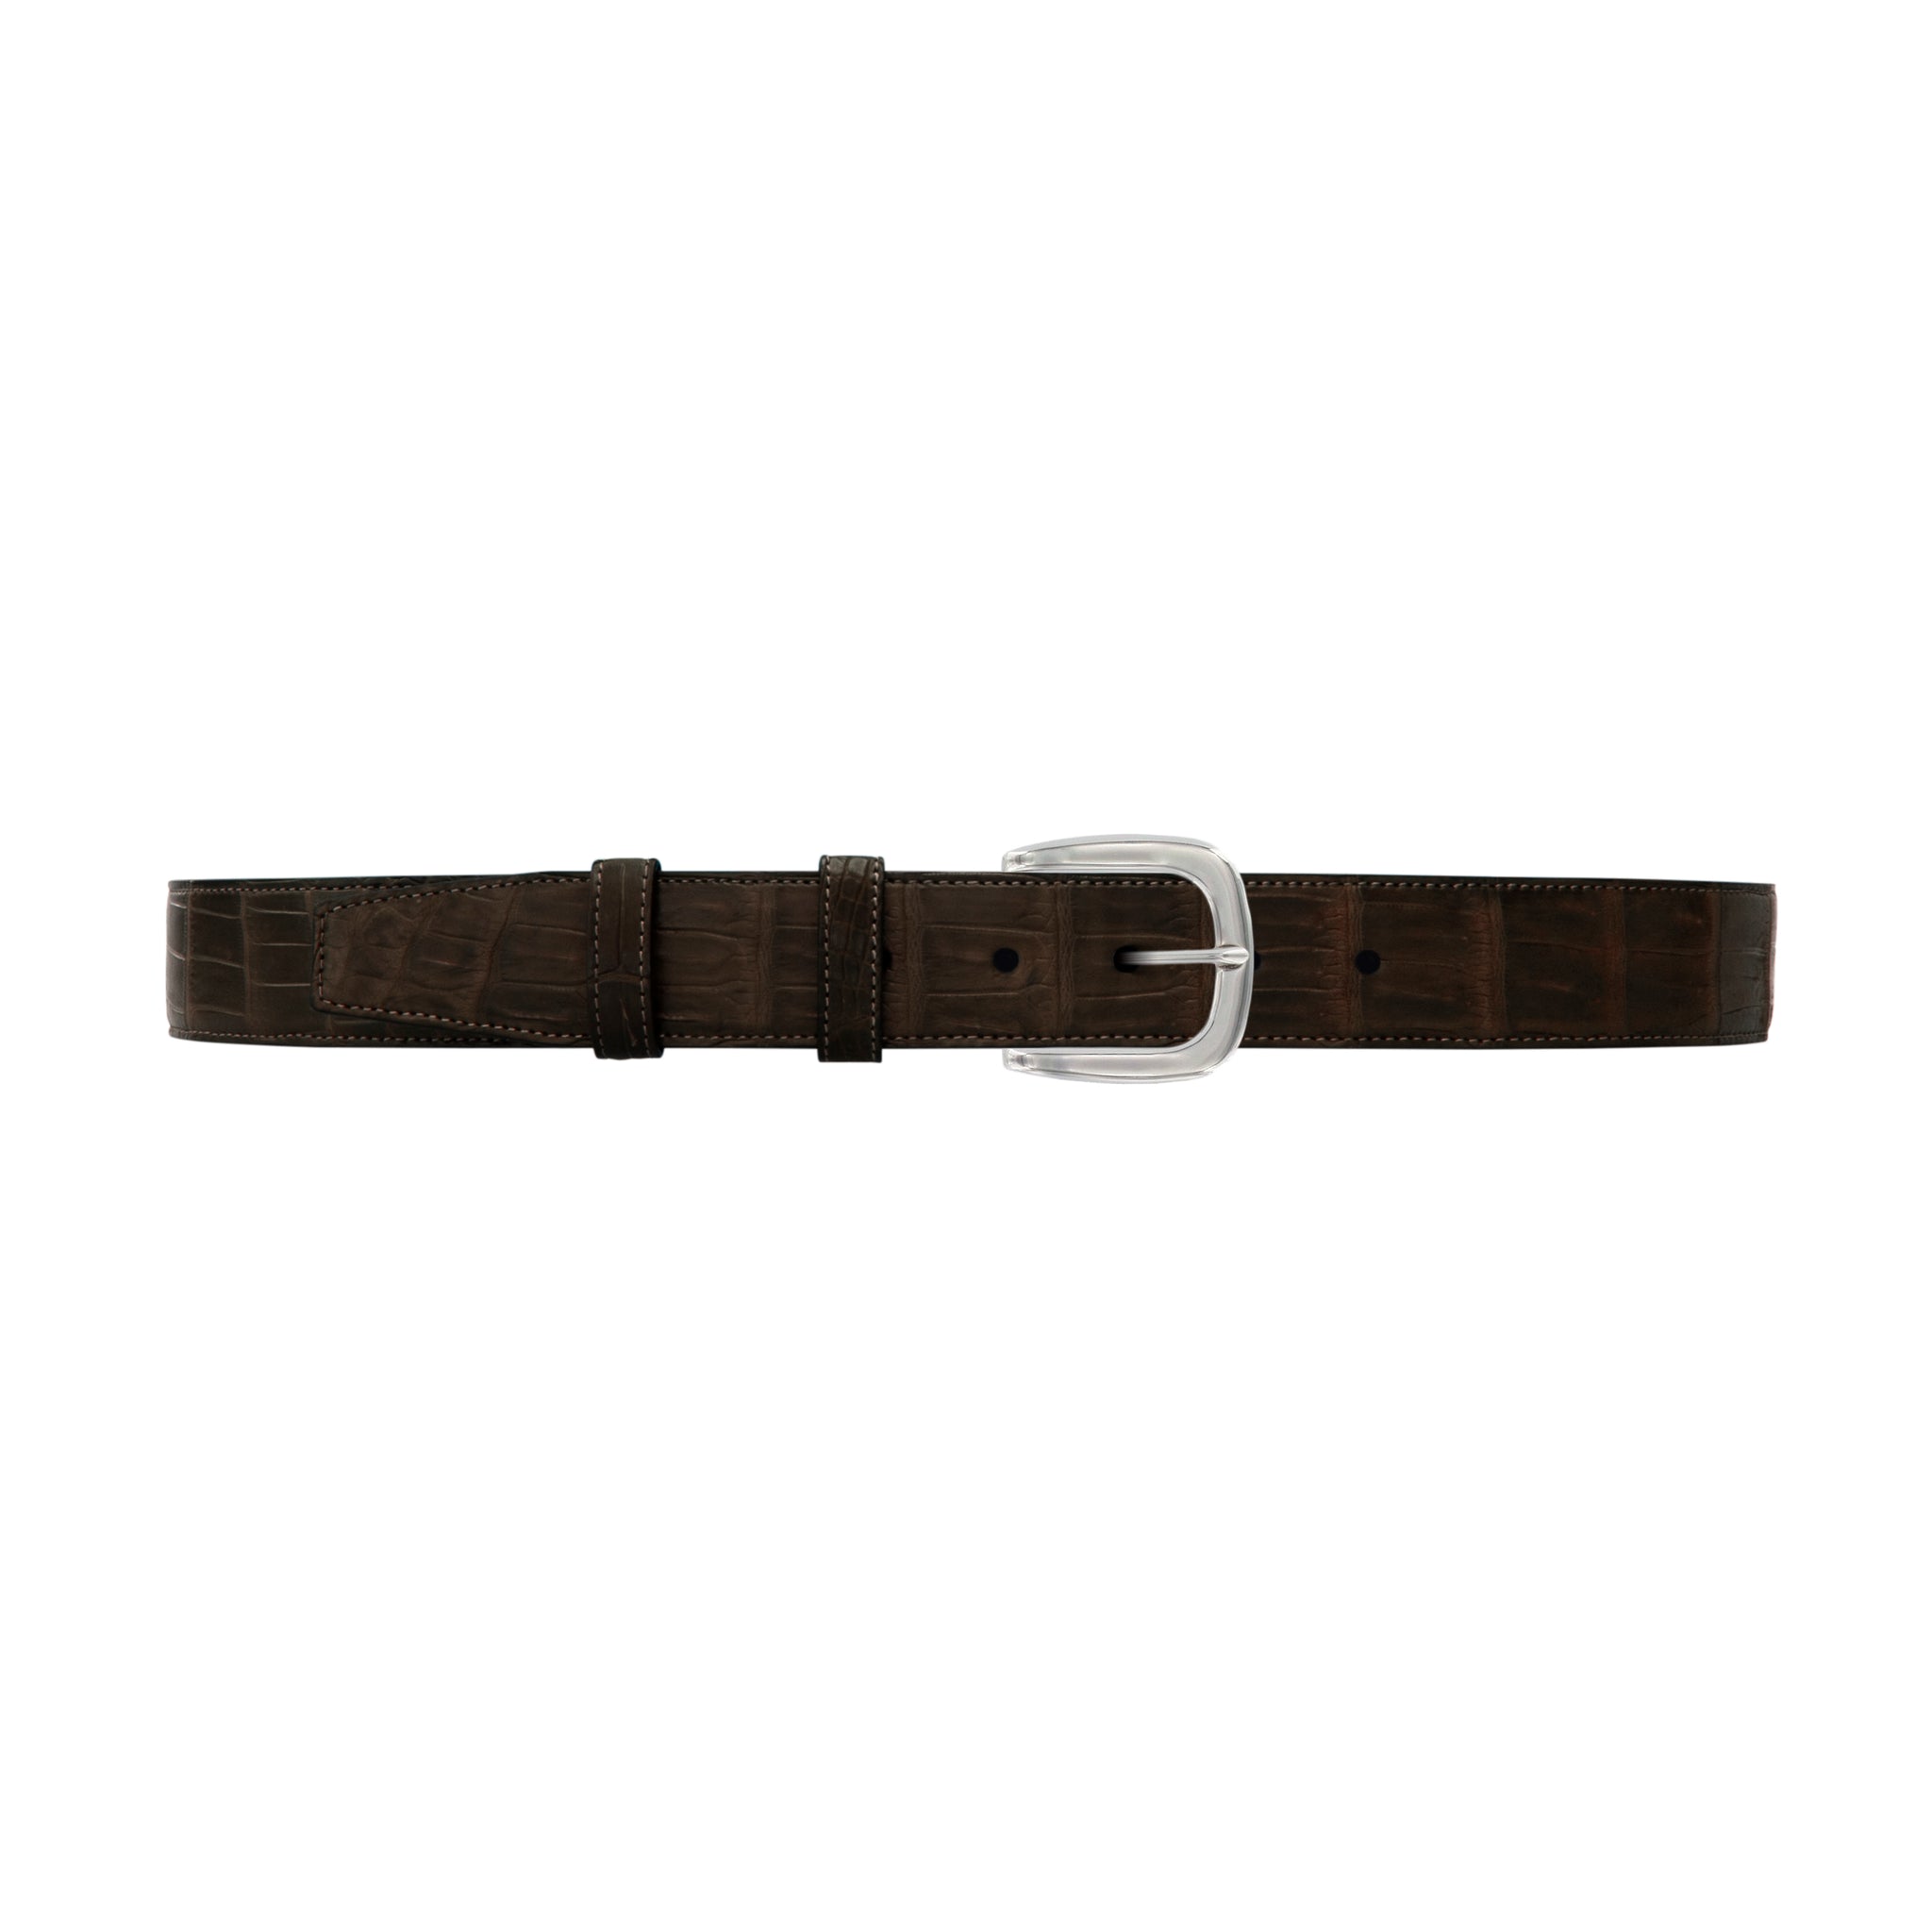 1 1/2" Espresso Classic Belt with Oxford Cocktail Buckle in Polished Nickel